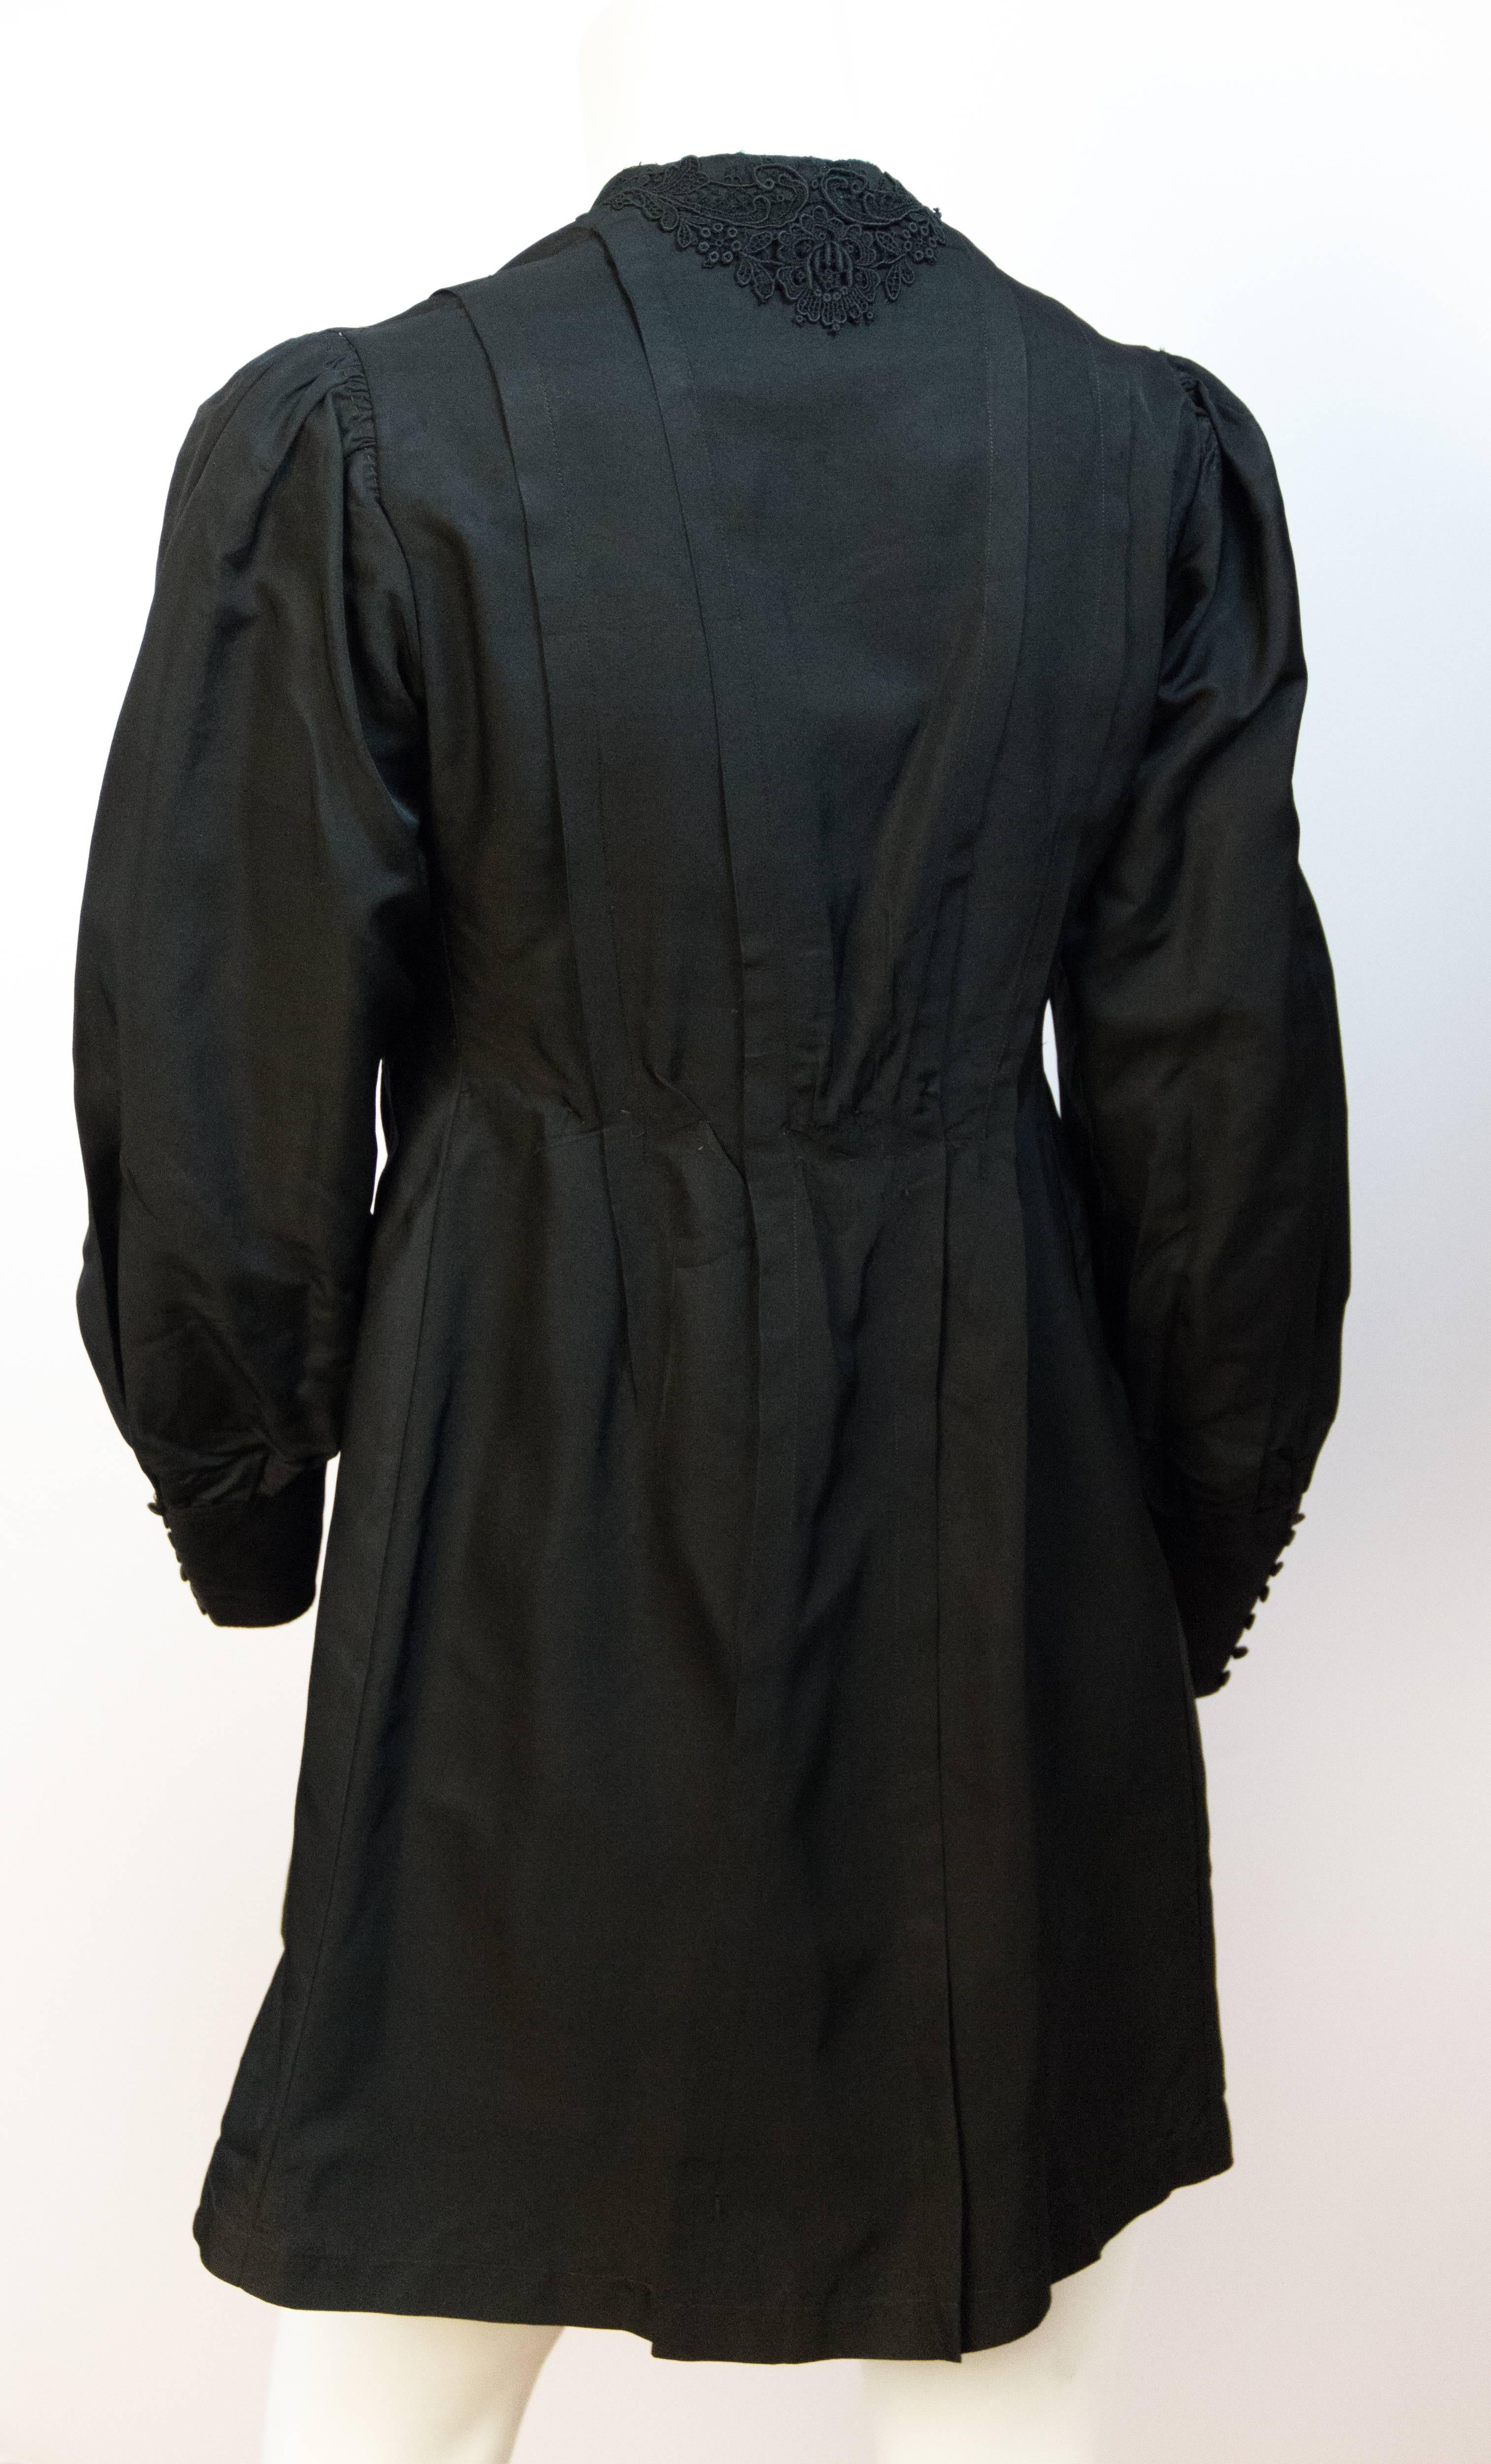 Edwardian black silk jacket with bright purple insert in bodice. Black silk covered buttons. Black silk trim throughout. Unlined